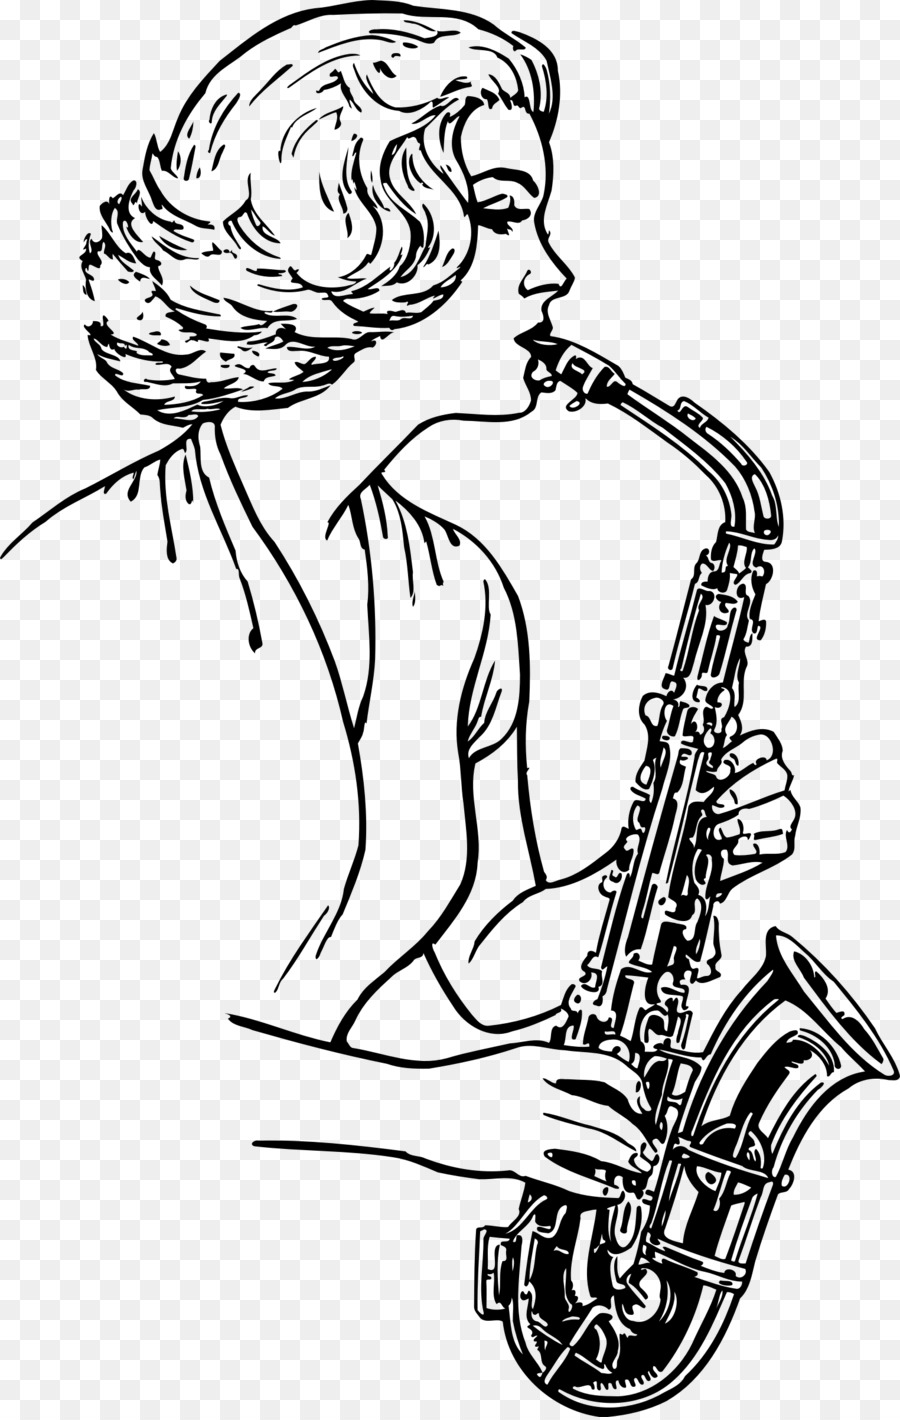 Baritone saxophone Drawing Musical Instruments Clip art - instruments clipart png download - 1524*2400 - Free Transparent  png Download.